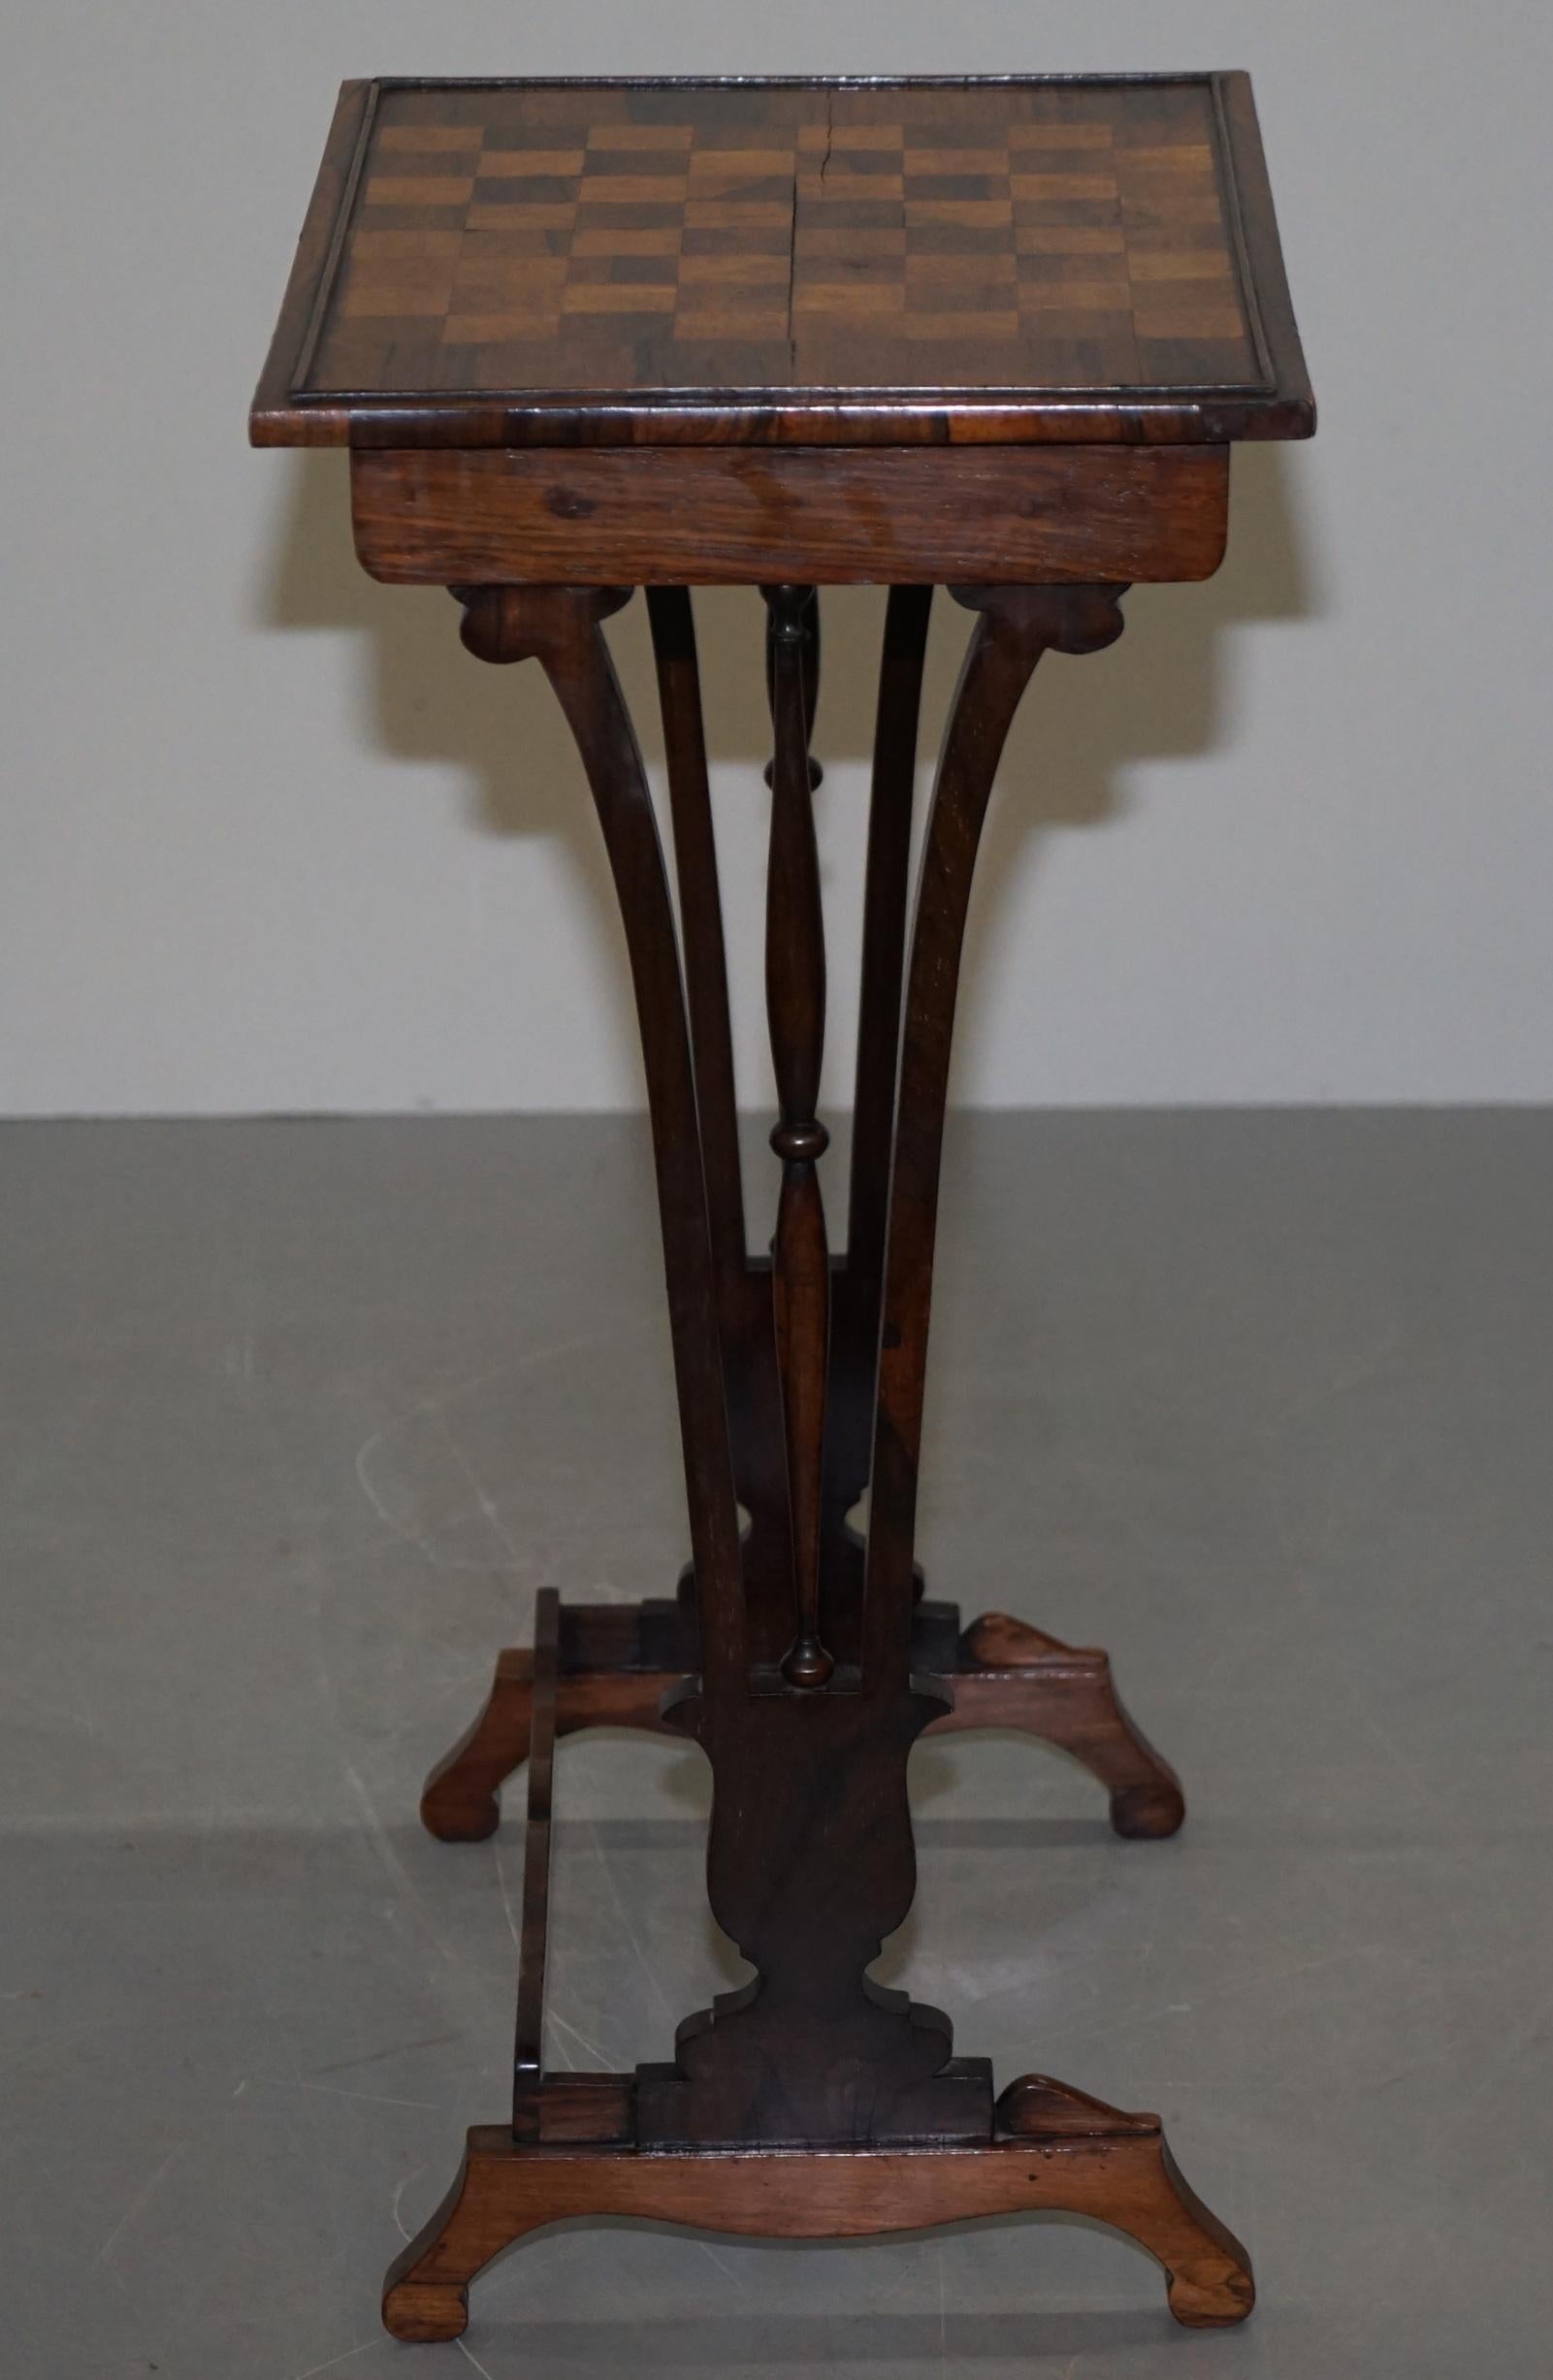 Fine Regency Nest of Hardwood Tables with Chessboard Top Attributed to Gillows For Sale 4